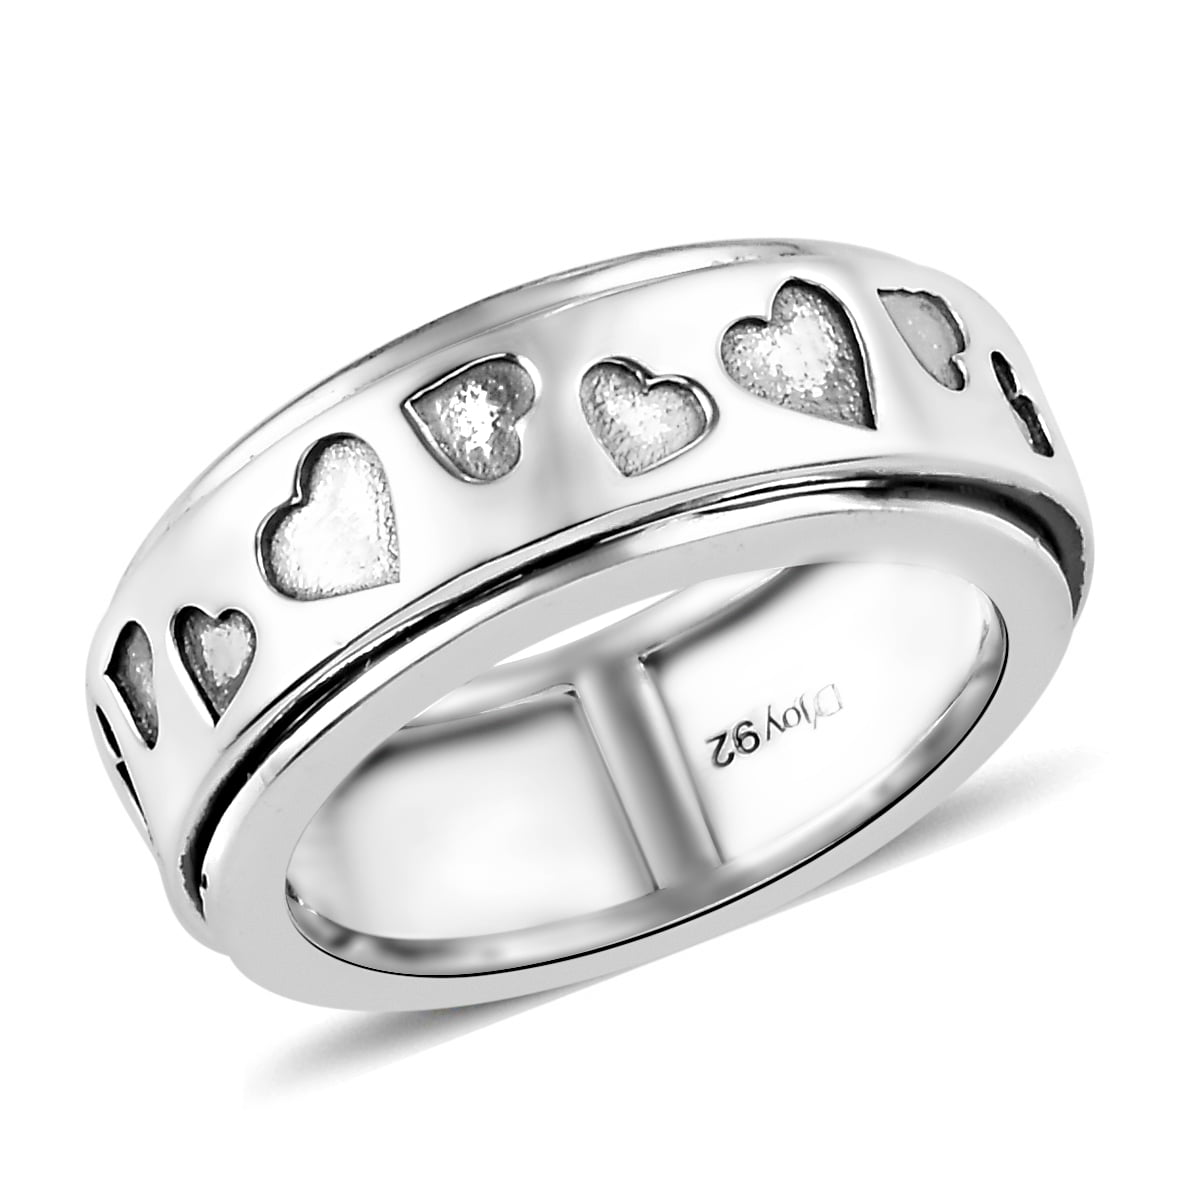 Mens Womens Spinner Band Ring 925 Sterling Silver Artisan Crafted Statement Boho Handmade Fashion Moon and Star Cross Vintage Spinner Band Ring